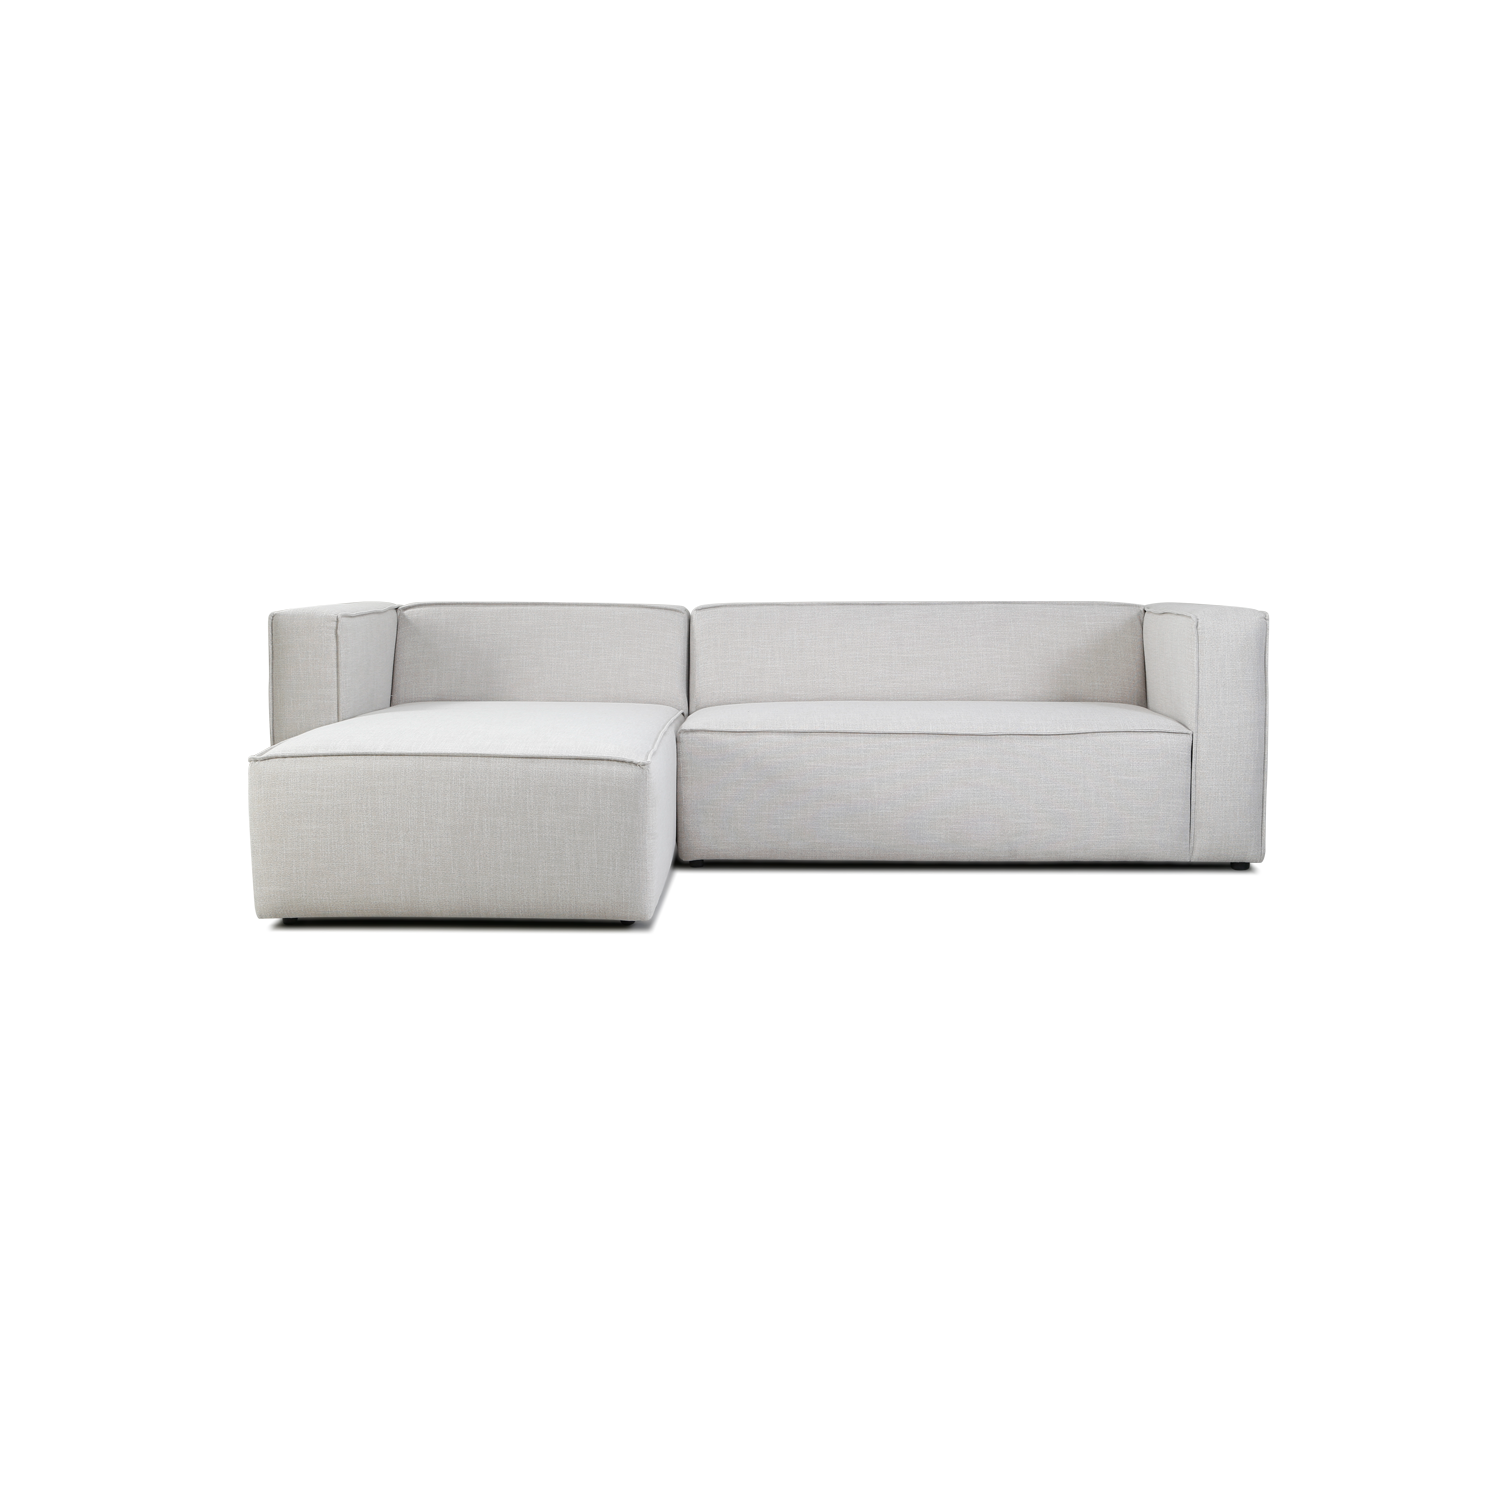 Medium: 2 Seater + Daybed [Left]